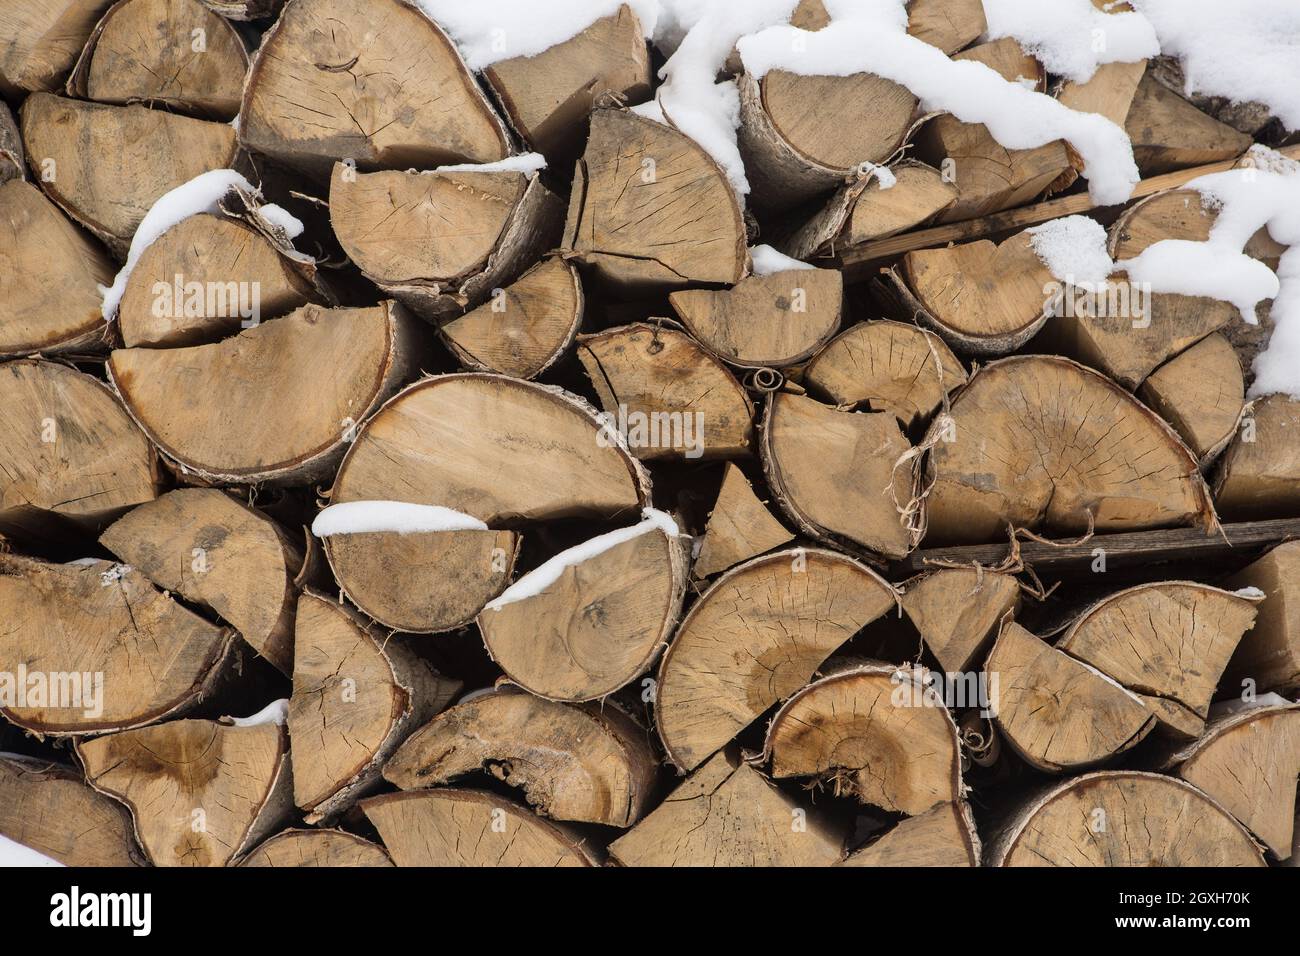 A pile of birch wood. prepared for the winter for kindling the village stove. Stock Photo